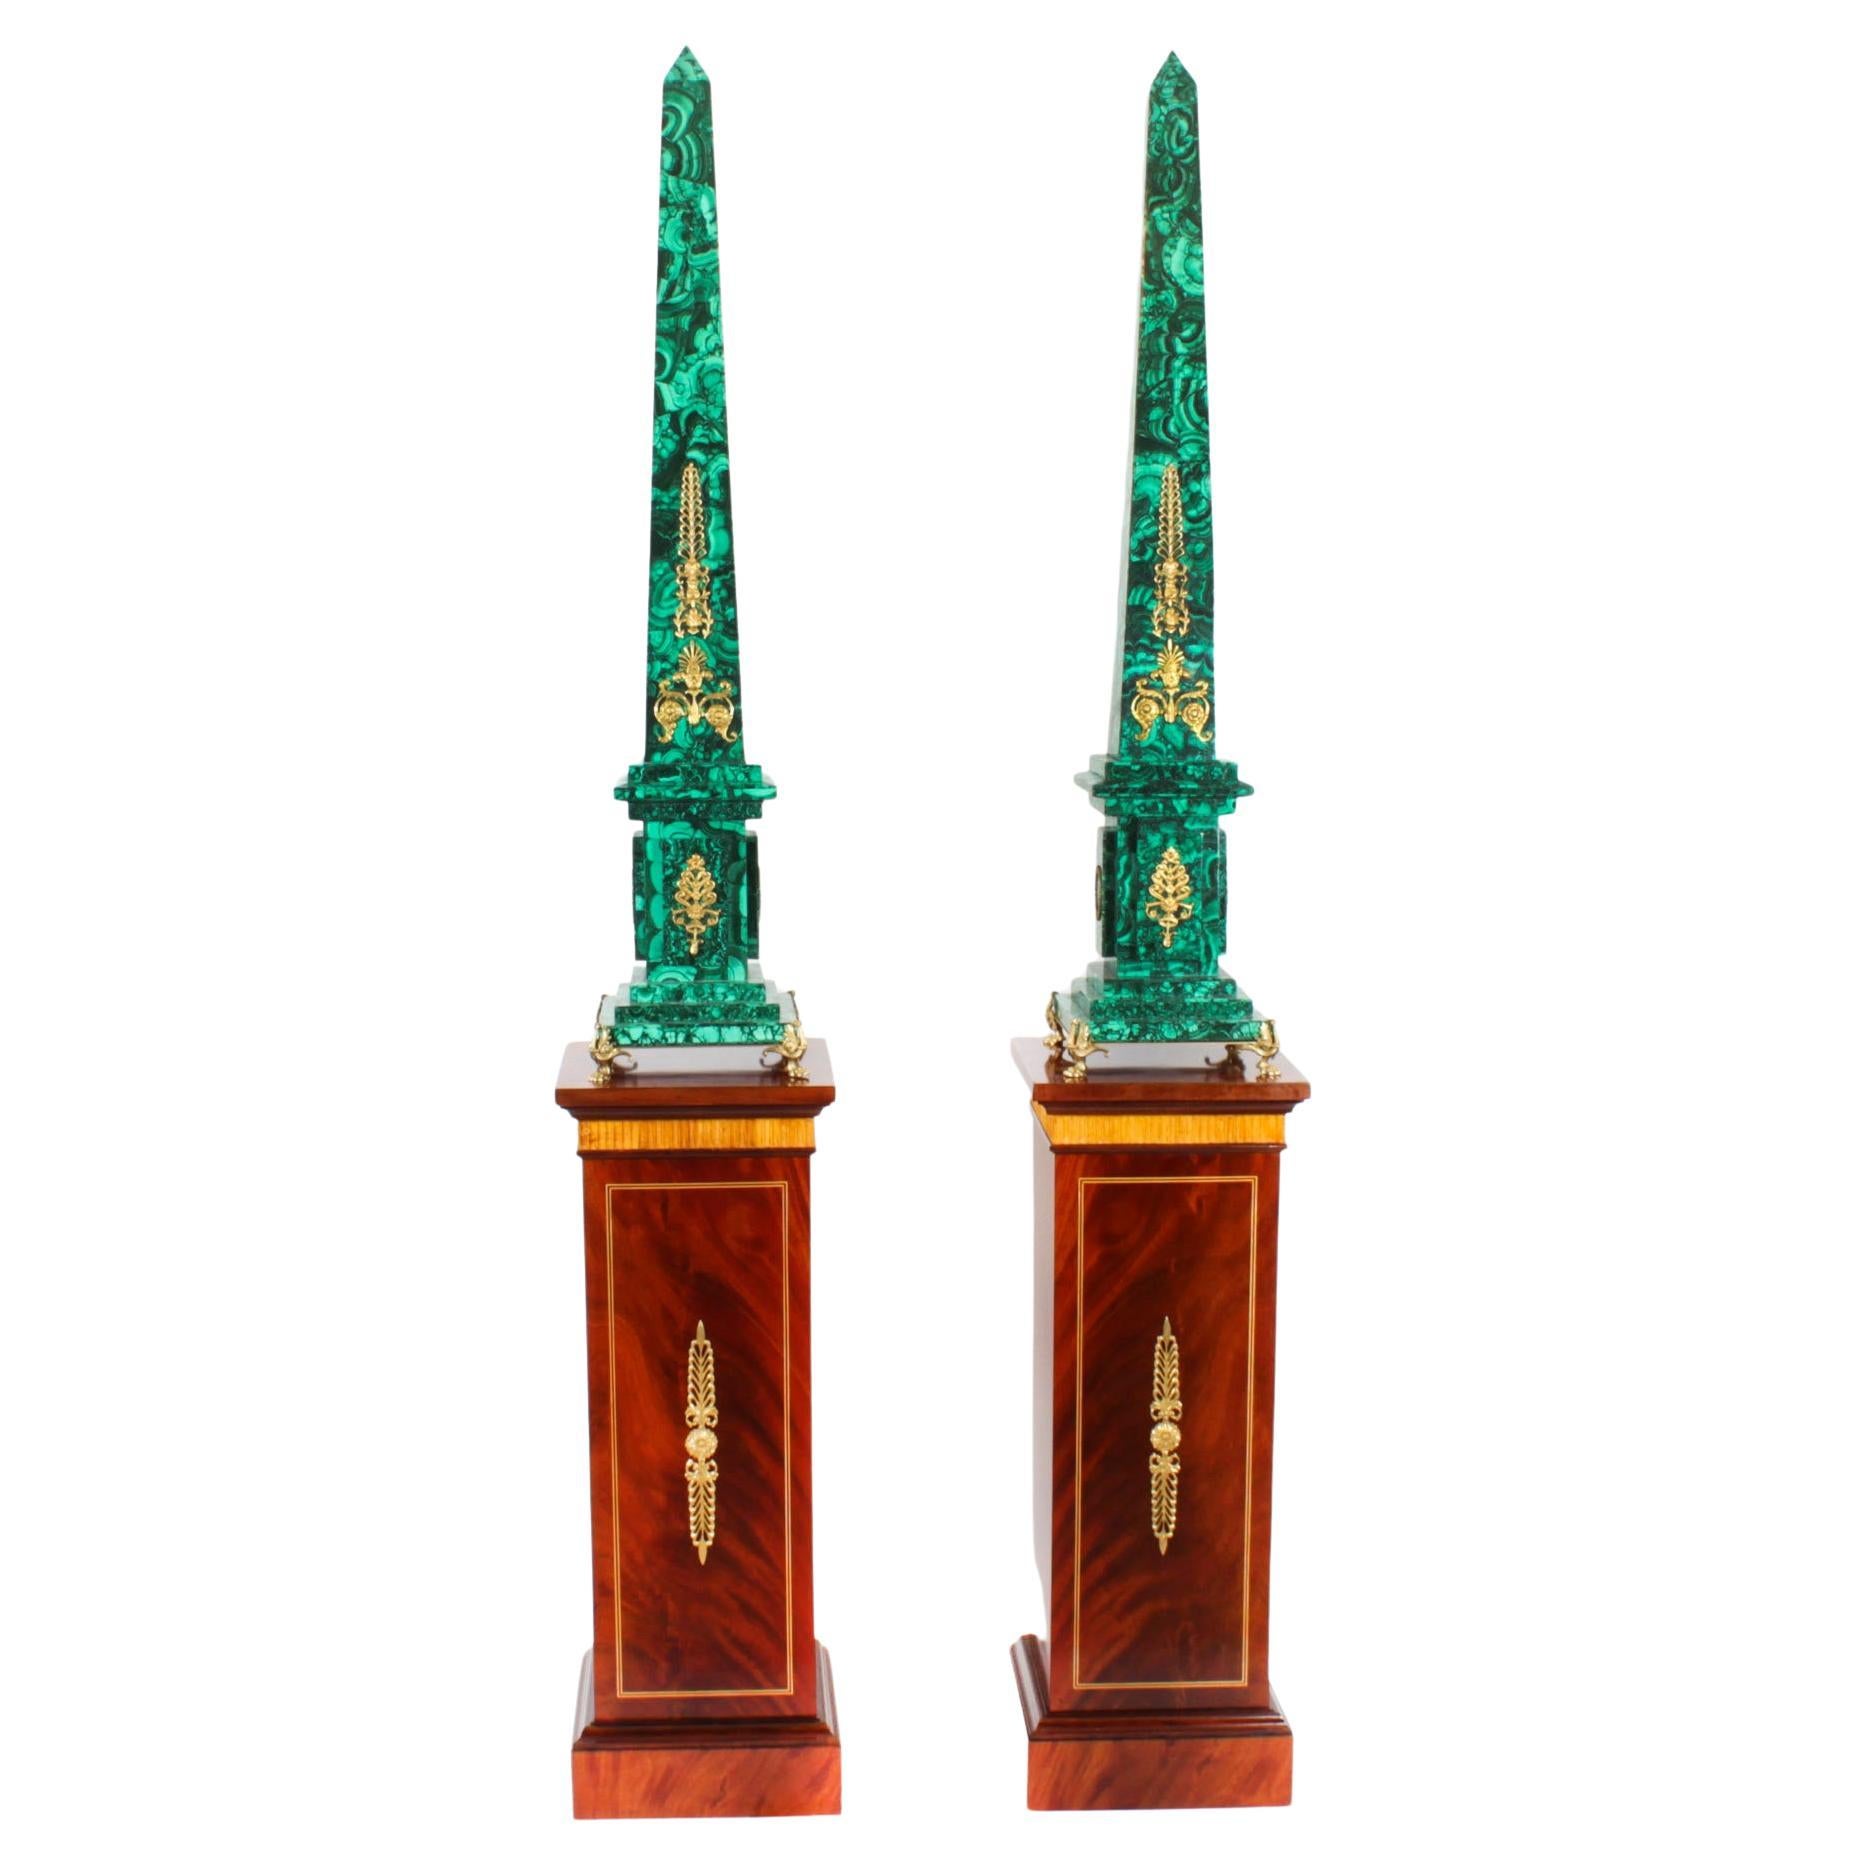 Antique Pair Monumental Ormolu Mounted Malachite Obelisks on Stands, 1920s For Sale